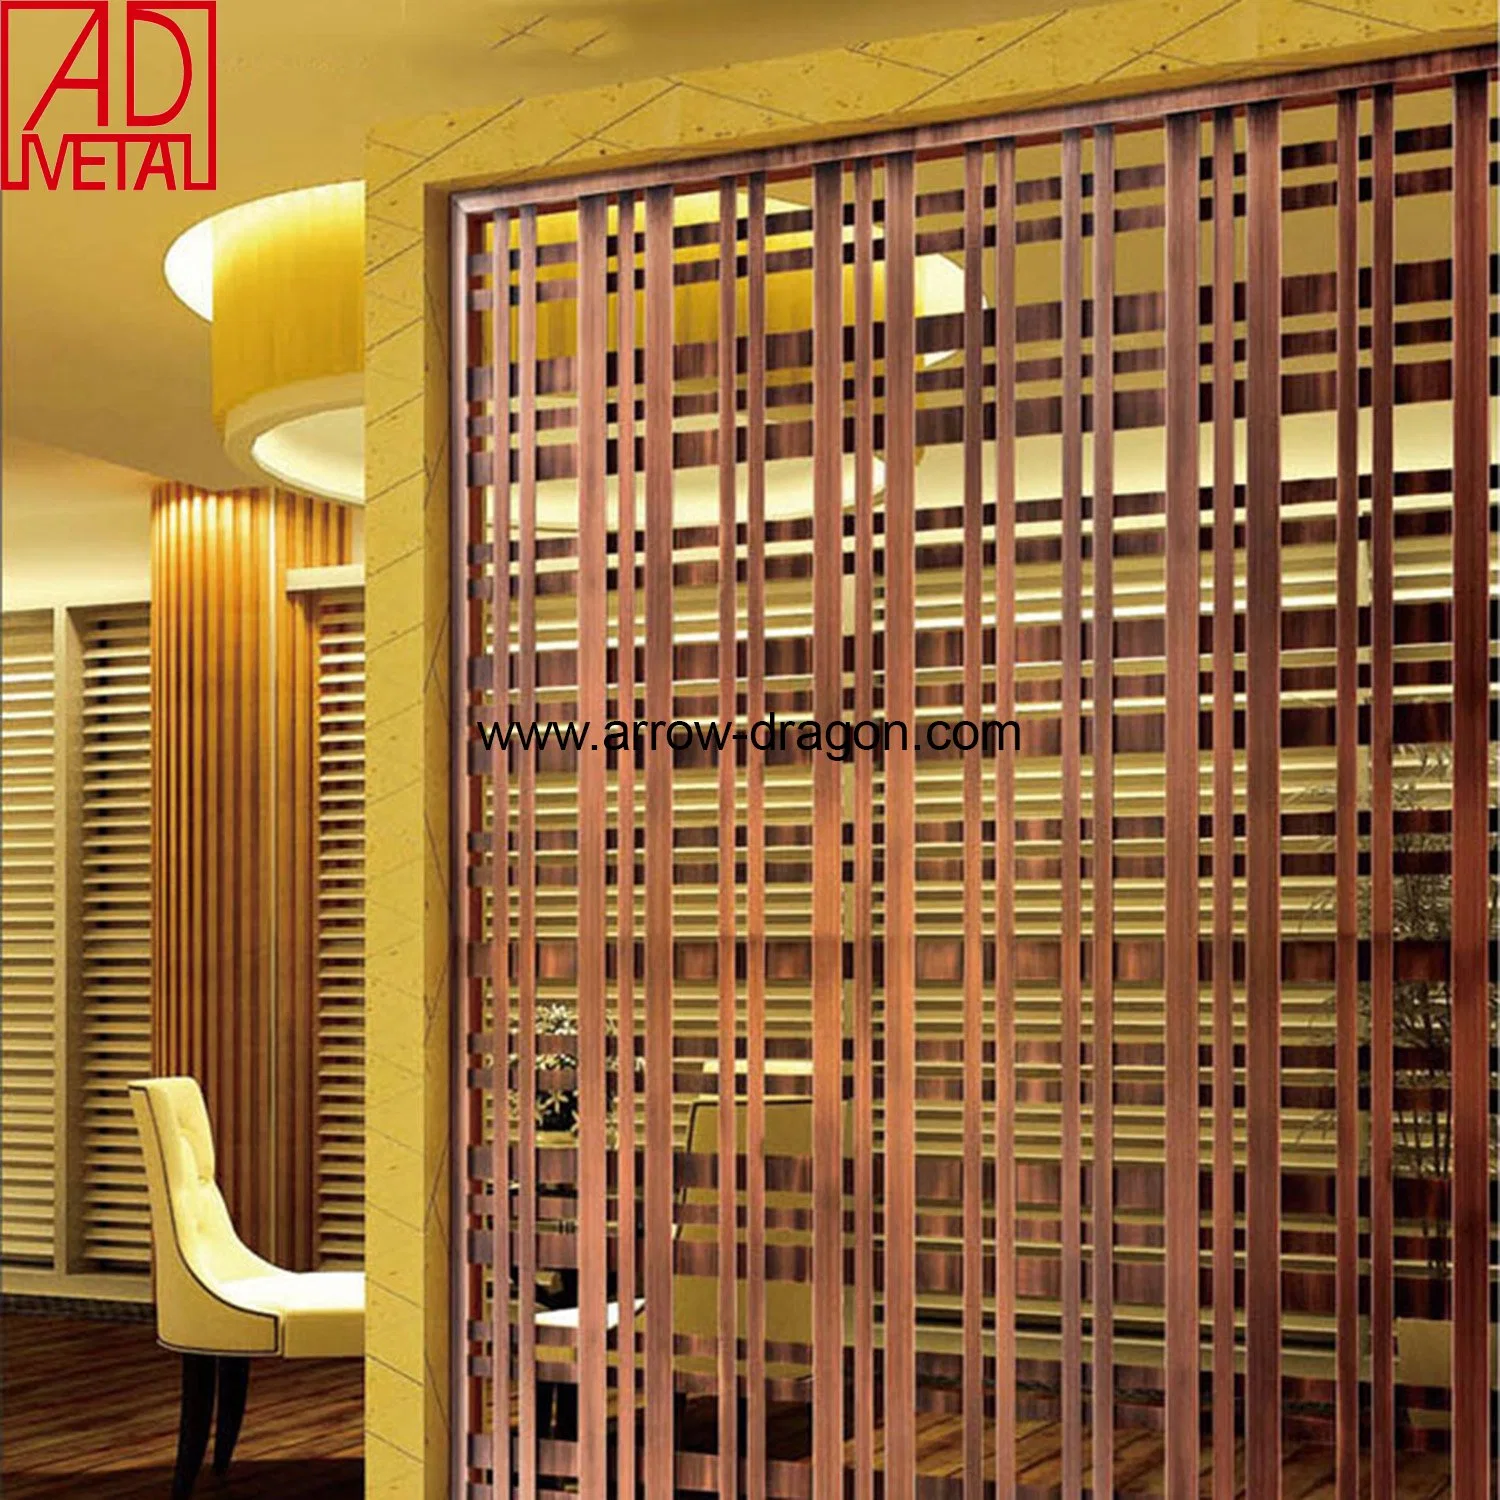 Aluminum Stainless Steel Brass Laser Cut CNC Router Wall Cladding Perforated Sheet Screen Panel for Hotel/Cafe/Office Partition Divider